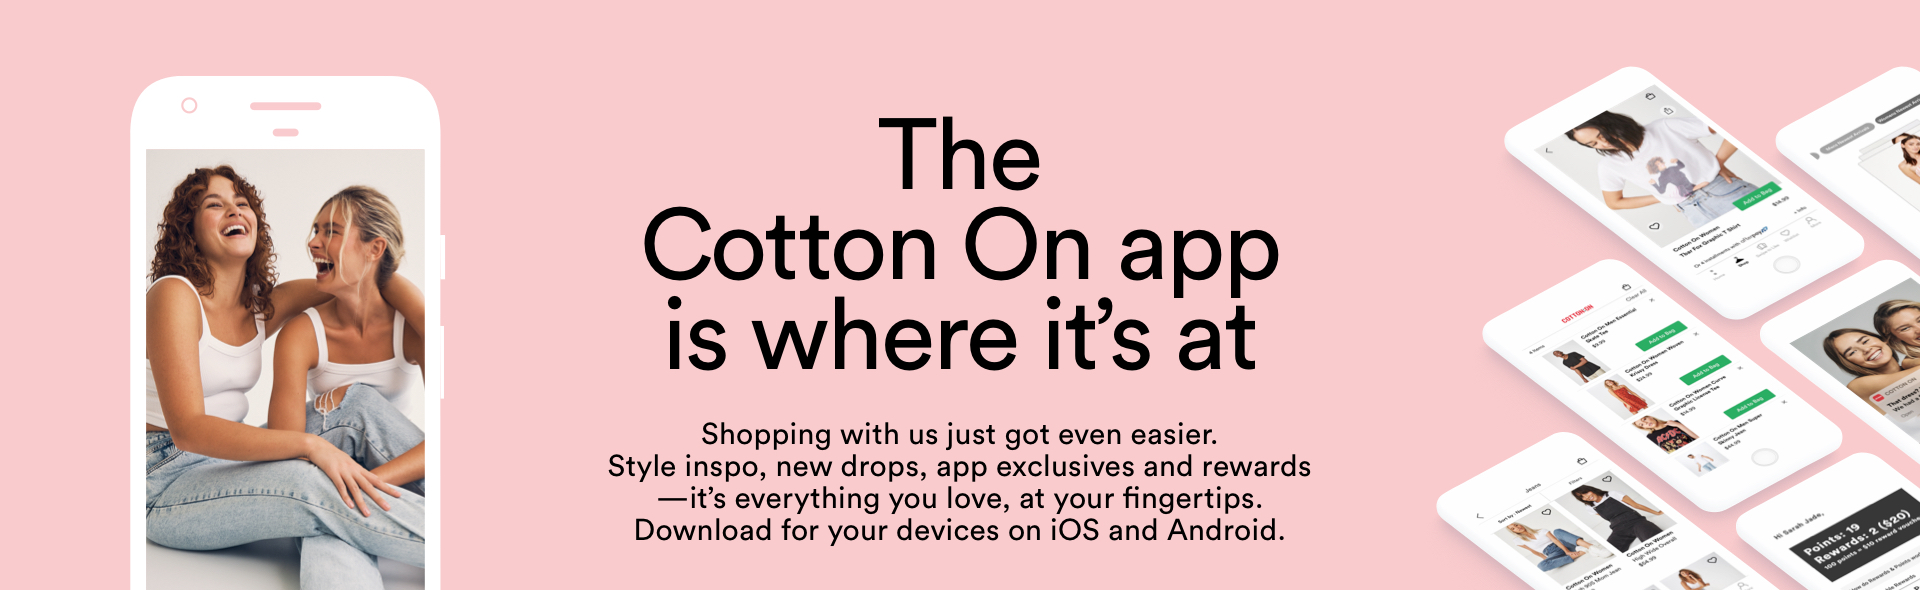 The Cotton On App is where it's at.